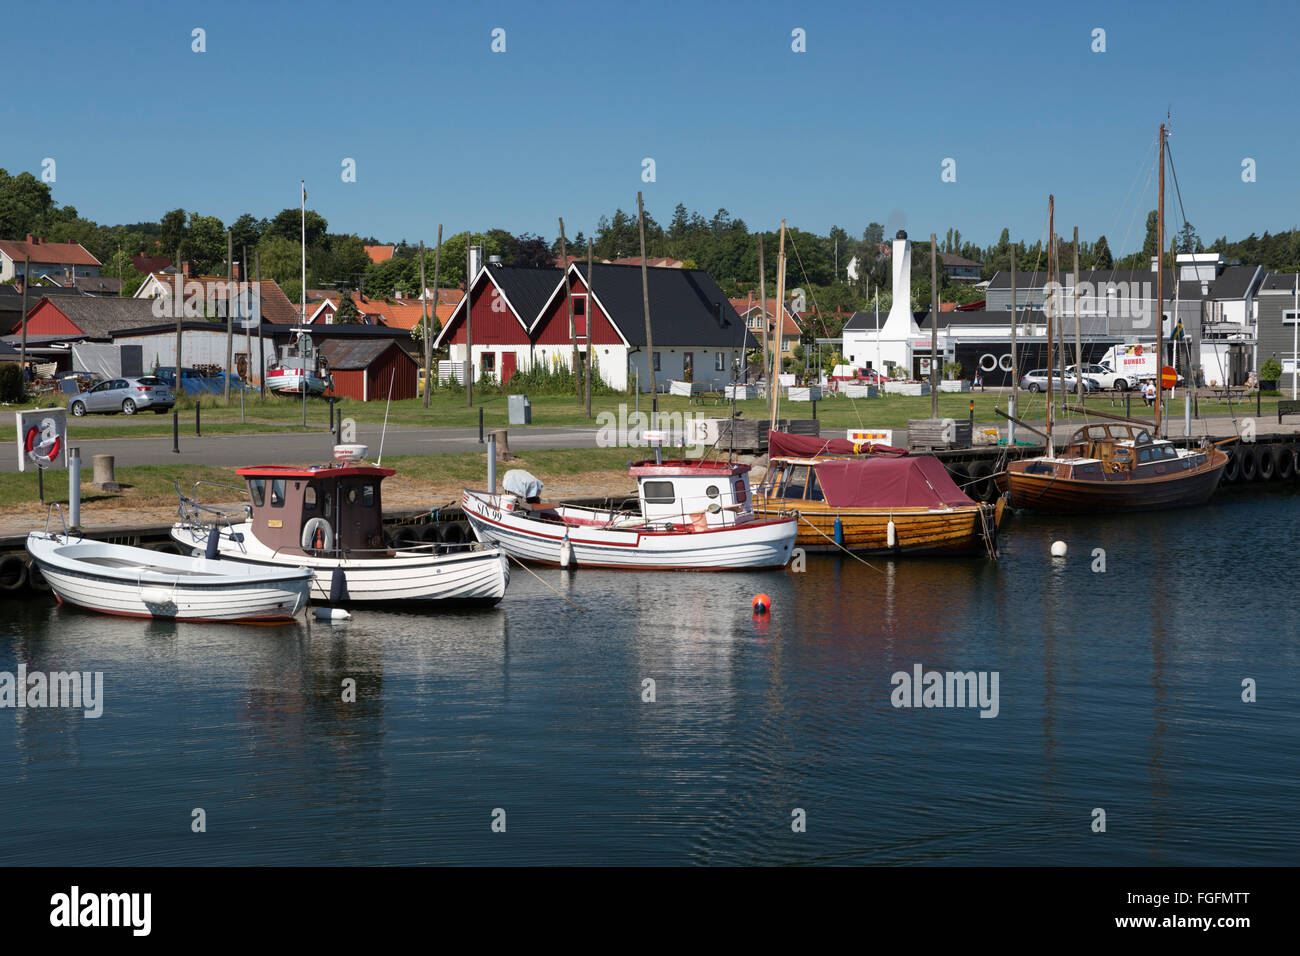 View over harbour and town, Kivik, Skane, South Sweden, Sweden, Scandinavia, Europe Stock Photo